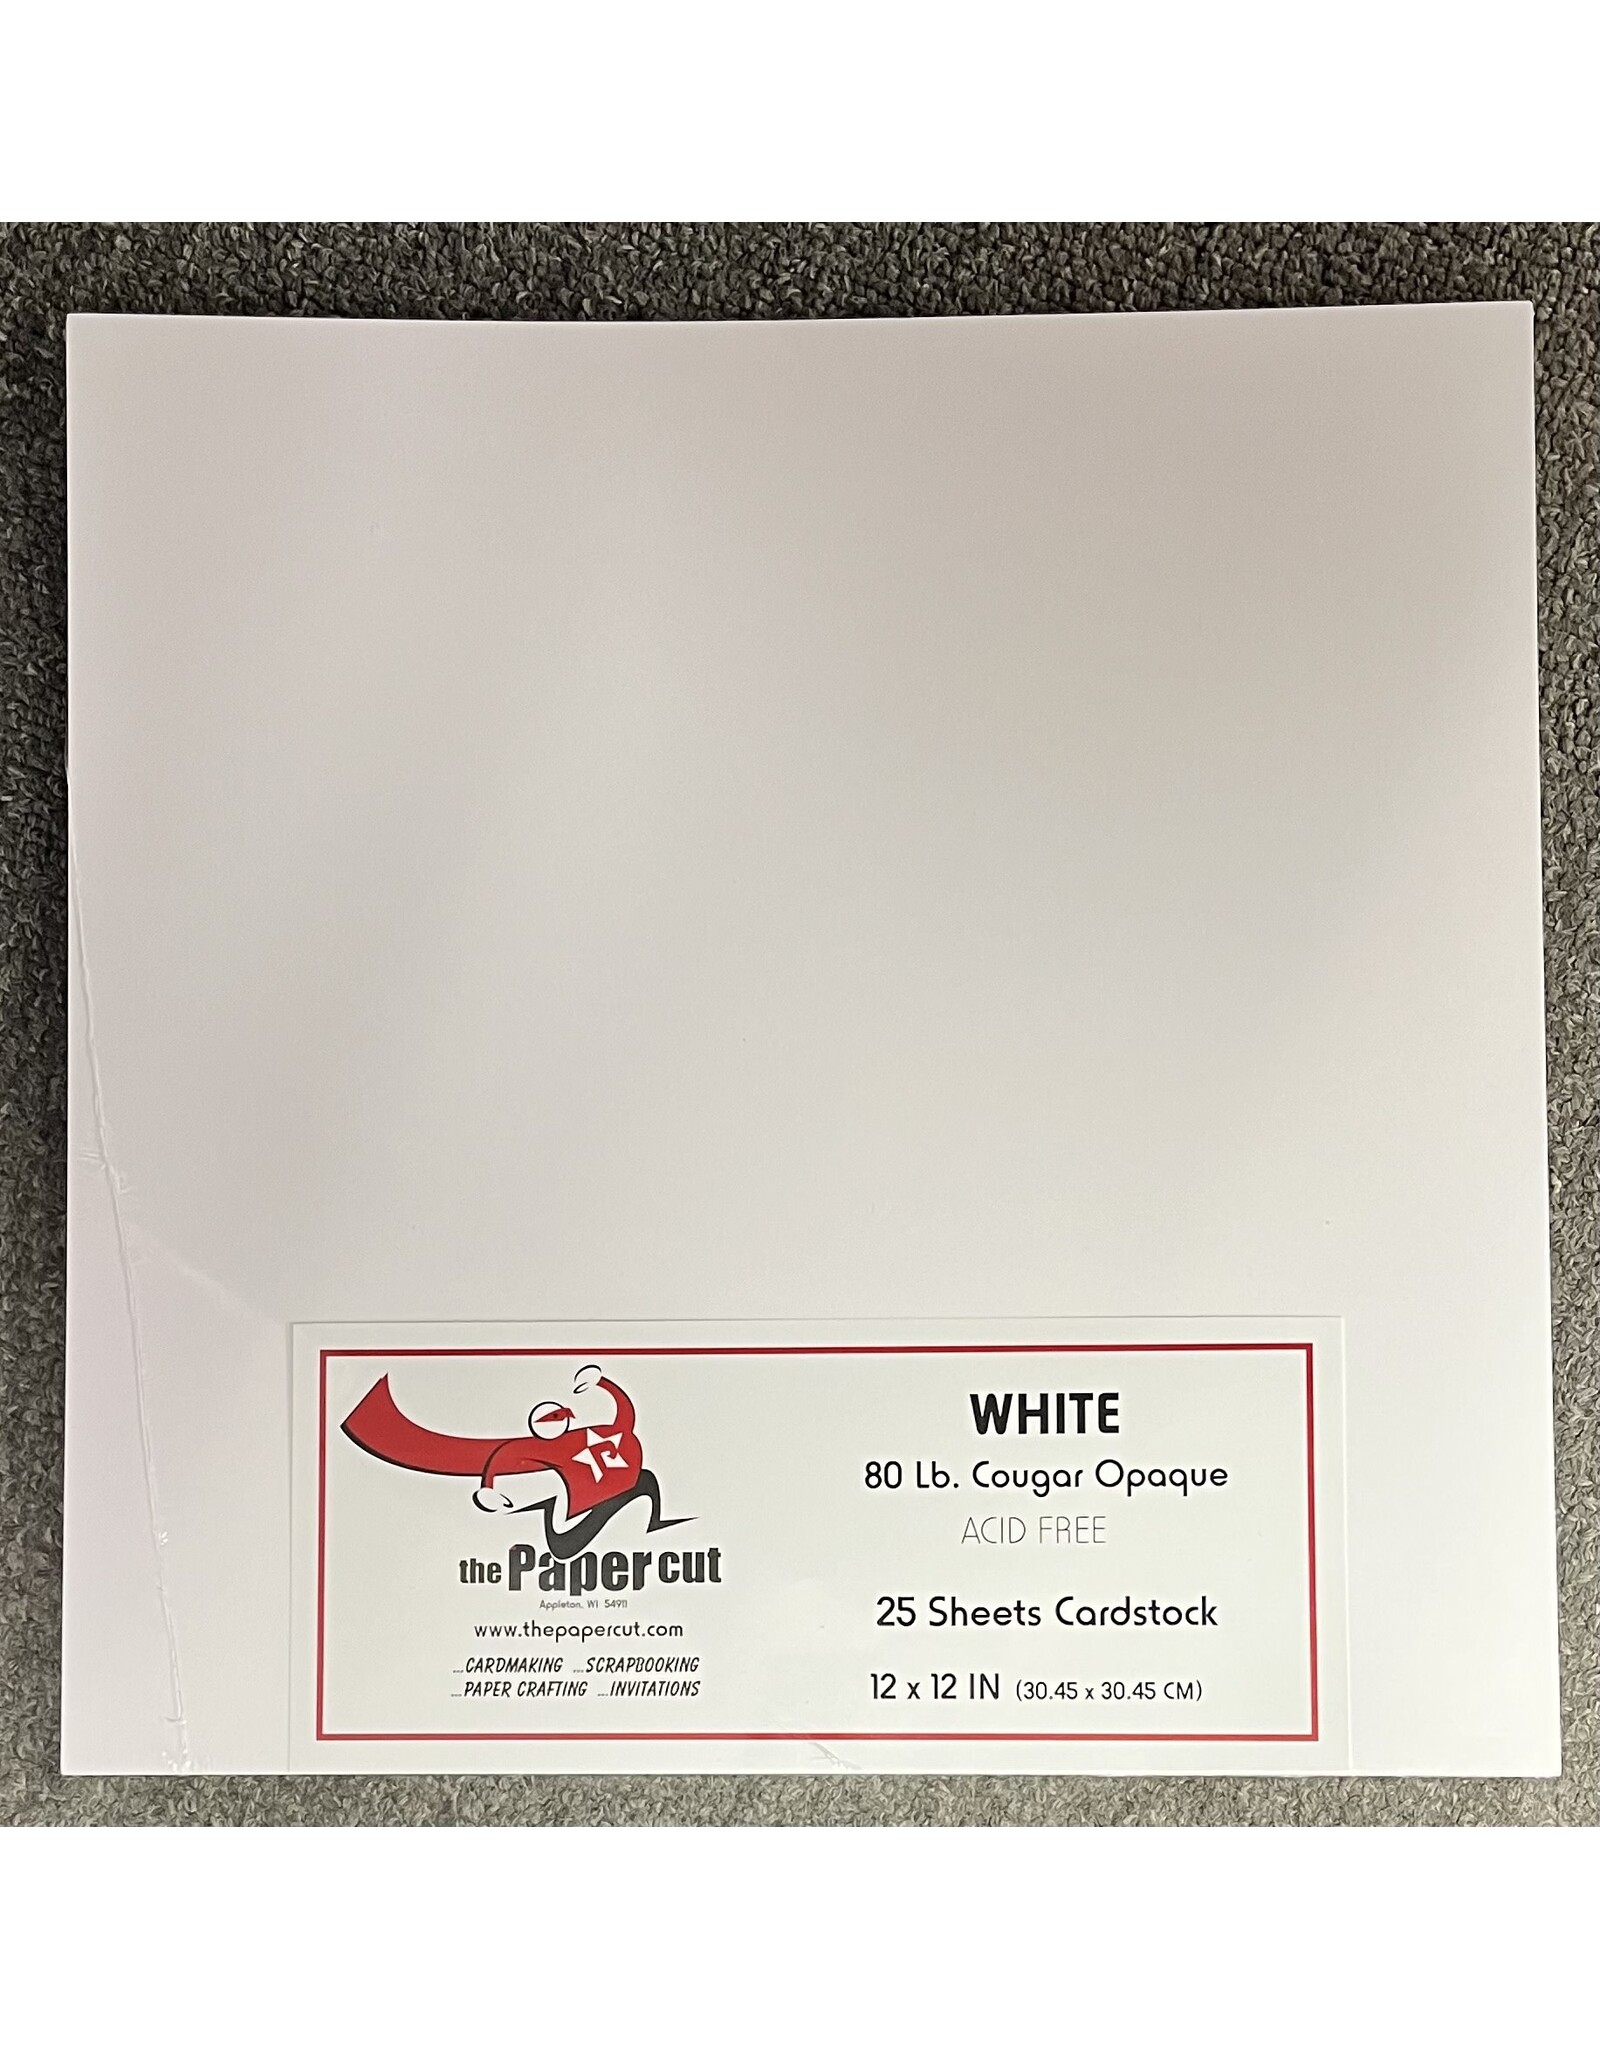 Scrapbook adhesives Adhesive Sheets 12x12in, 25 Sheets for die cutting